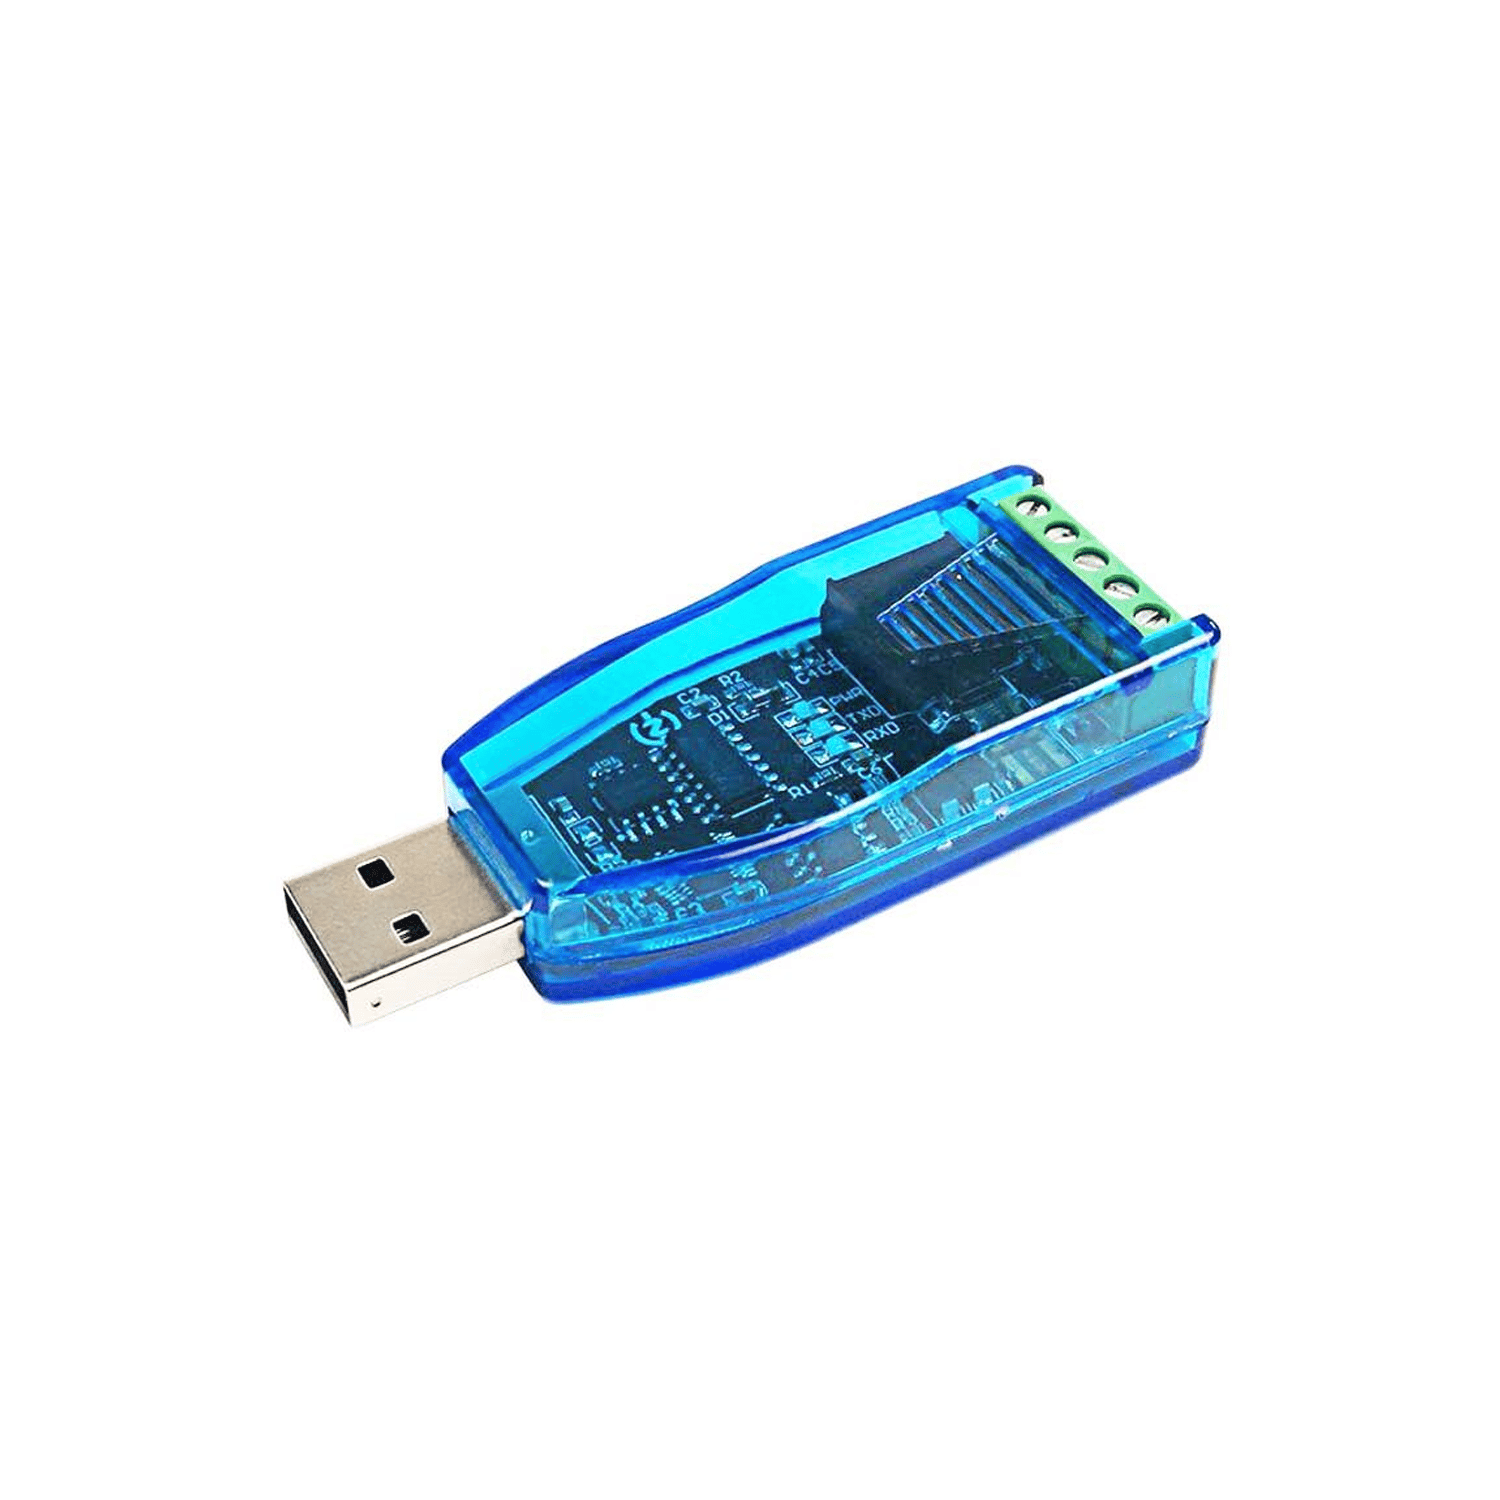 Module for converting RS485 to USB